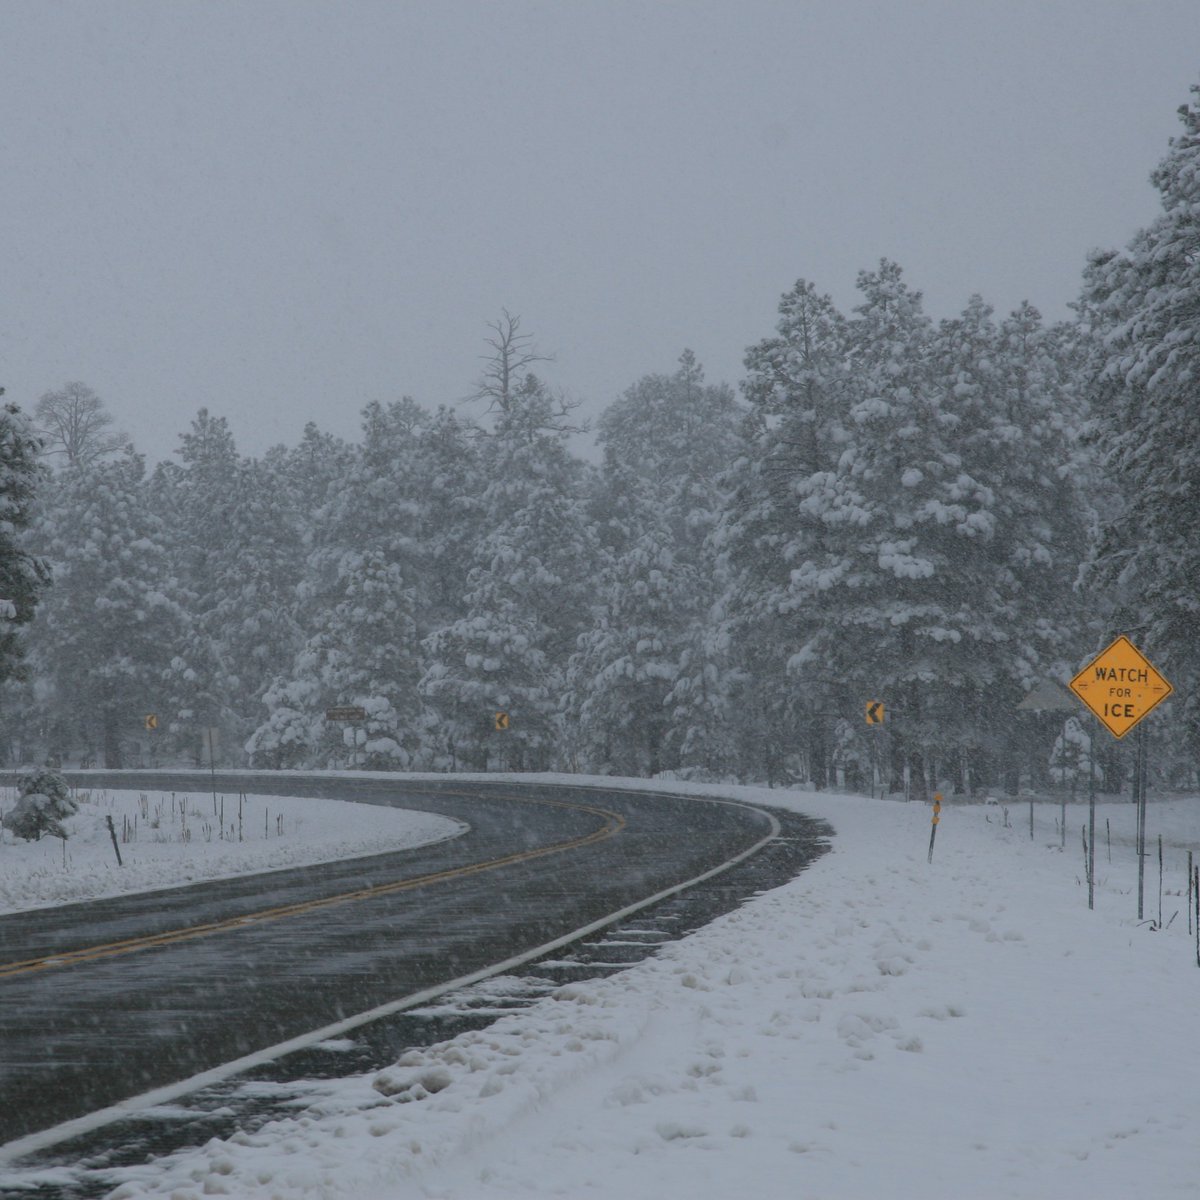 Throwback to a winter-inspired playlist we made a few years ago to help you get into the winter spirit and keep your eyes on the road during your high-country road trip. 🎧: bit.ly/41nm8sx Learn more about traveling during the winter at azdot.gov/KnowSnow.